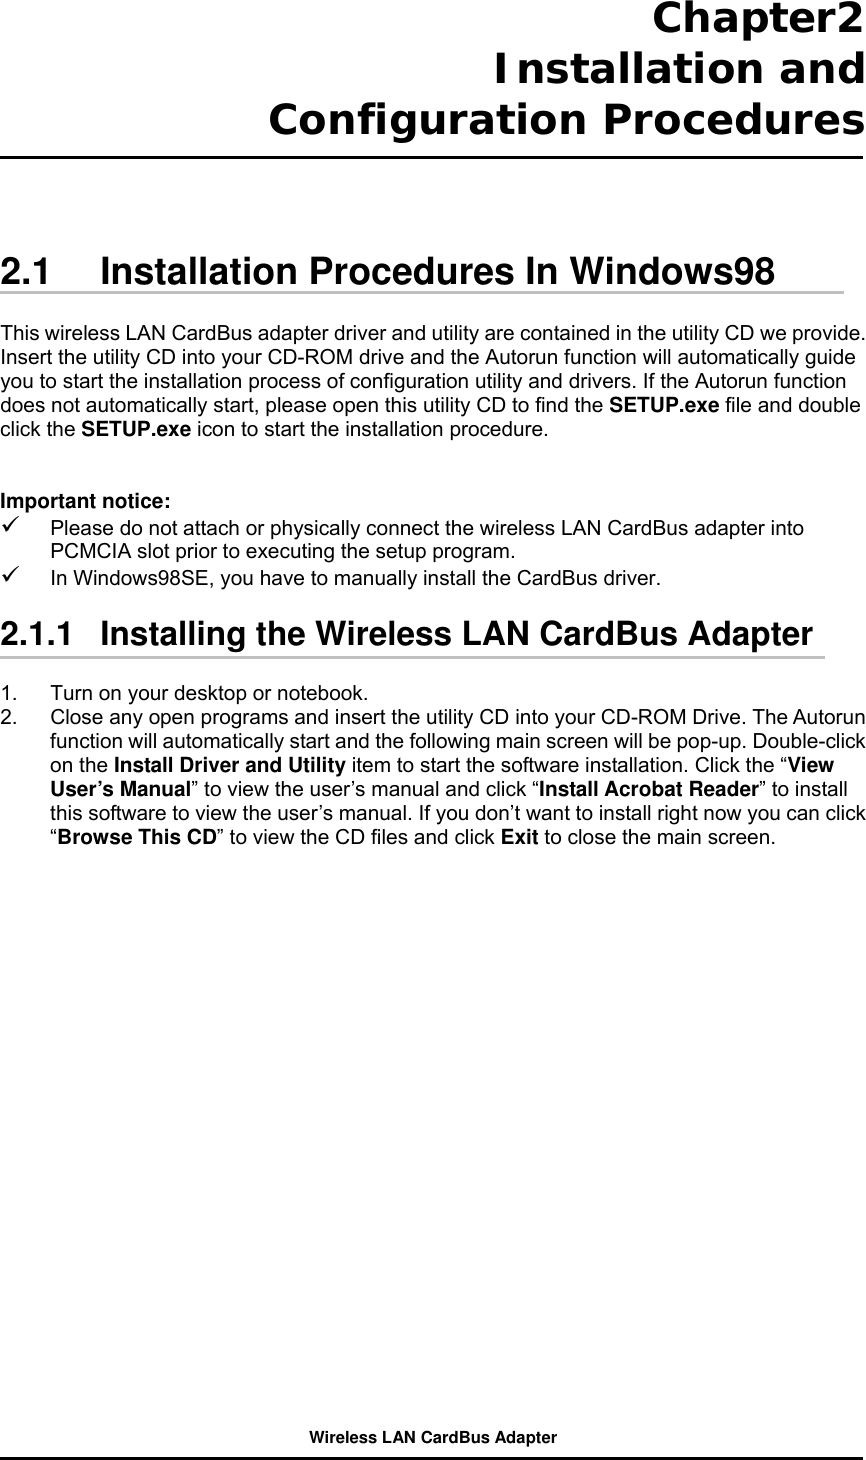 Chapter2  Installation and Configuration Procedures     2.1  Installation Procedures In Windows98  This wireless LAN CardBus adapter driver and utility are contained in the utility CD we provide. Insert the utility CD into your CD-ROM drive and the Autorun function will automatically guide you to start the installation process of configuration utility and drivers. If the Autorun function does not automatically start, please open this utility CD to find the SETUP.exe file and double click the SETUP.exe icon to start the installation procedure.     Important notice:   Please do not attach or physically connect the wireless LAN CardBus adapter into PCMCIA slot prior to executing the setup program.   In Windows98SE, you have to manually install the CardBus driver.  2.1.1   Installing the Wireless LAN CardBus Adapter  1.  Turn on your desktop or notebook.   2.  Close any open programs and insert the utility CD into your CD-ROM Drive. The Autorun function will automatically start and the following main screen will be pop-up. Double-click on the Install Driver and Utility item to start the software installation. Click the “View User’s Manual” to view the user’s manual and click “Install Acrobat Reader” to install this software to view the user’s manual. If you don’t want to install right now you can click “Browse This CD” to view the CD files and click Exit to close the main screen.  Wireless LAN CardBus Adapter 